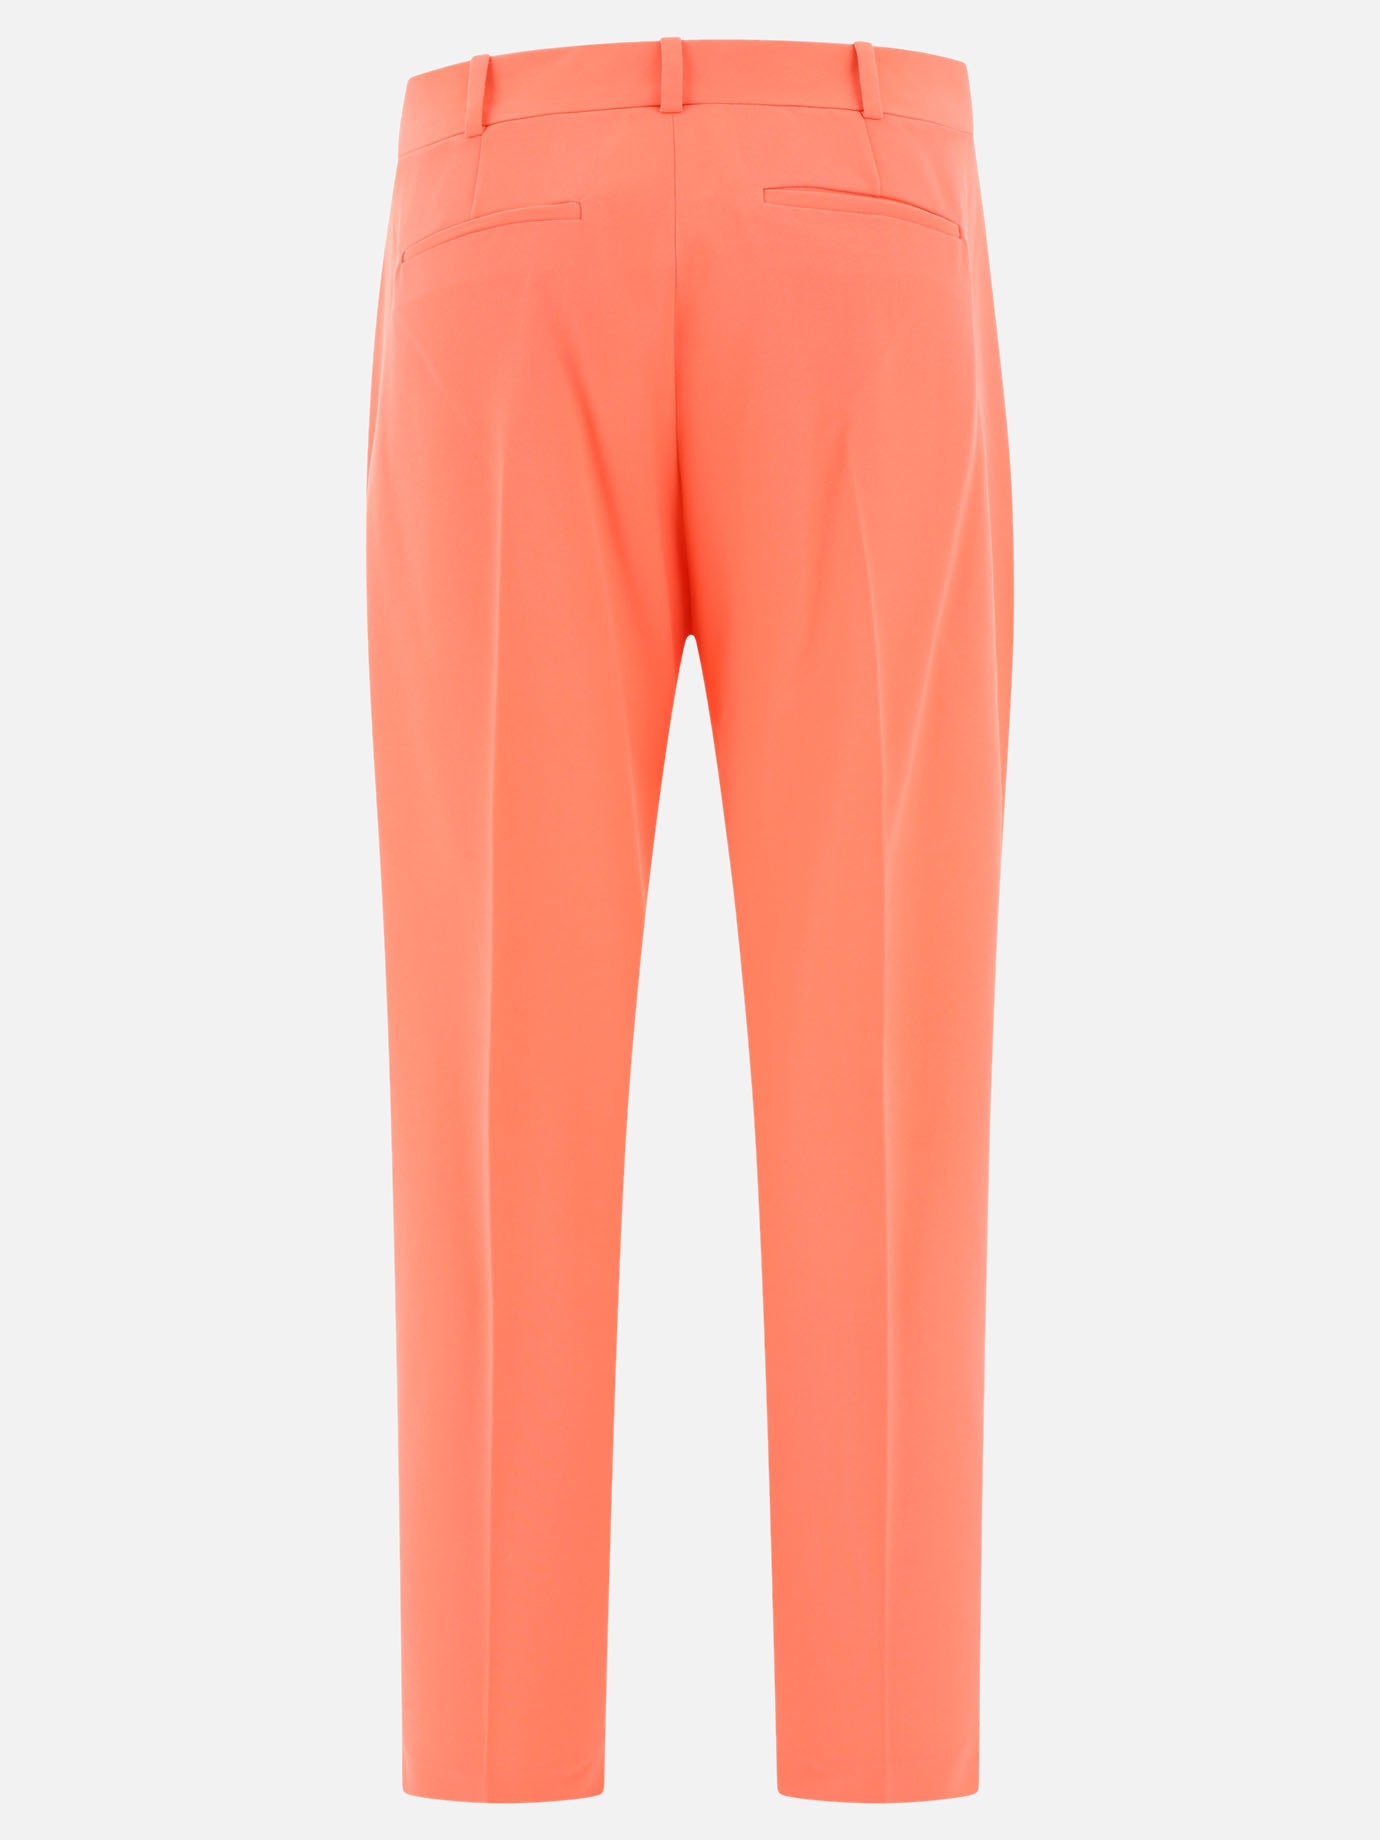 "Jagger" trousers